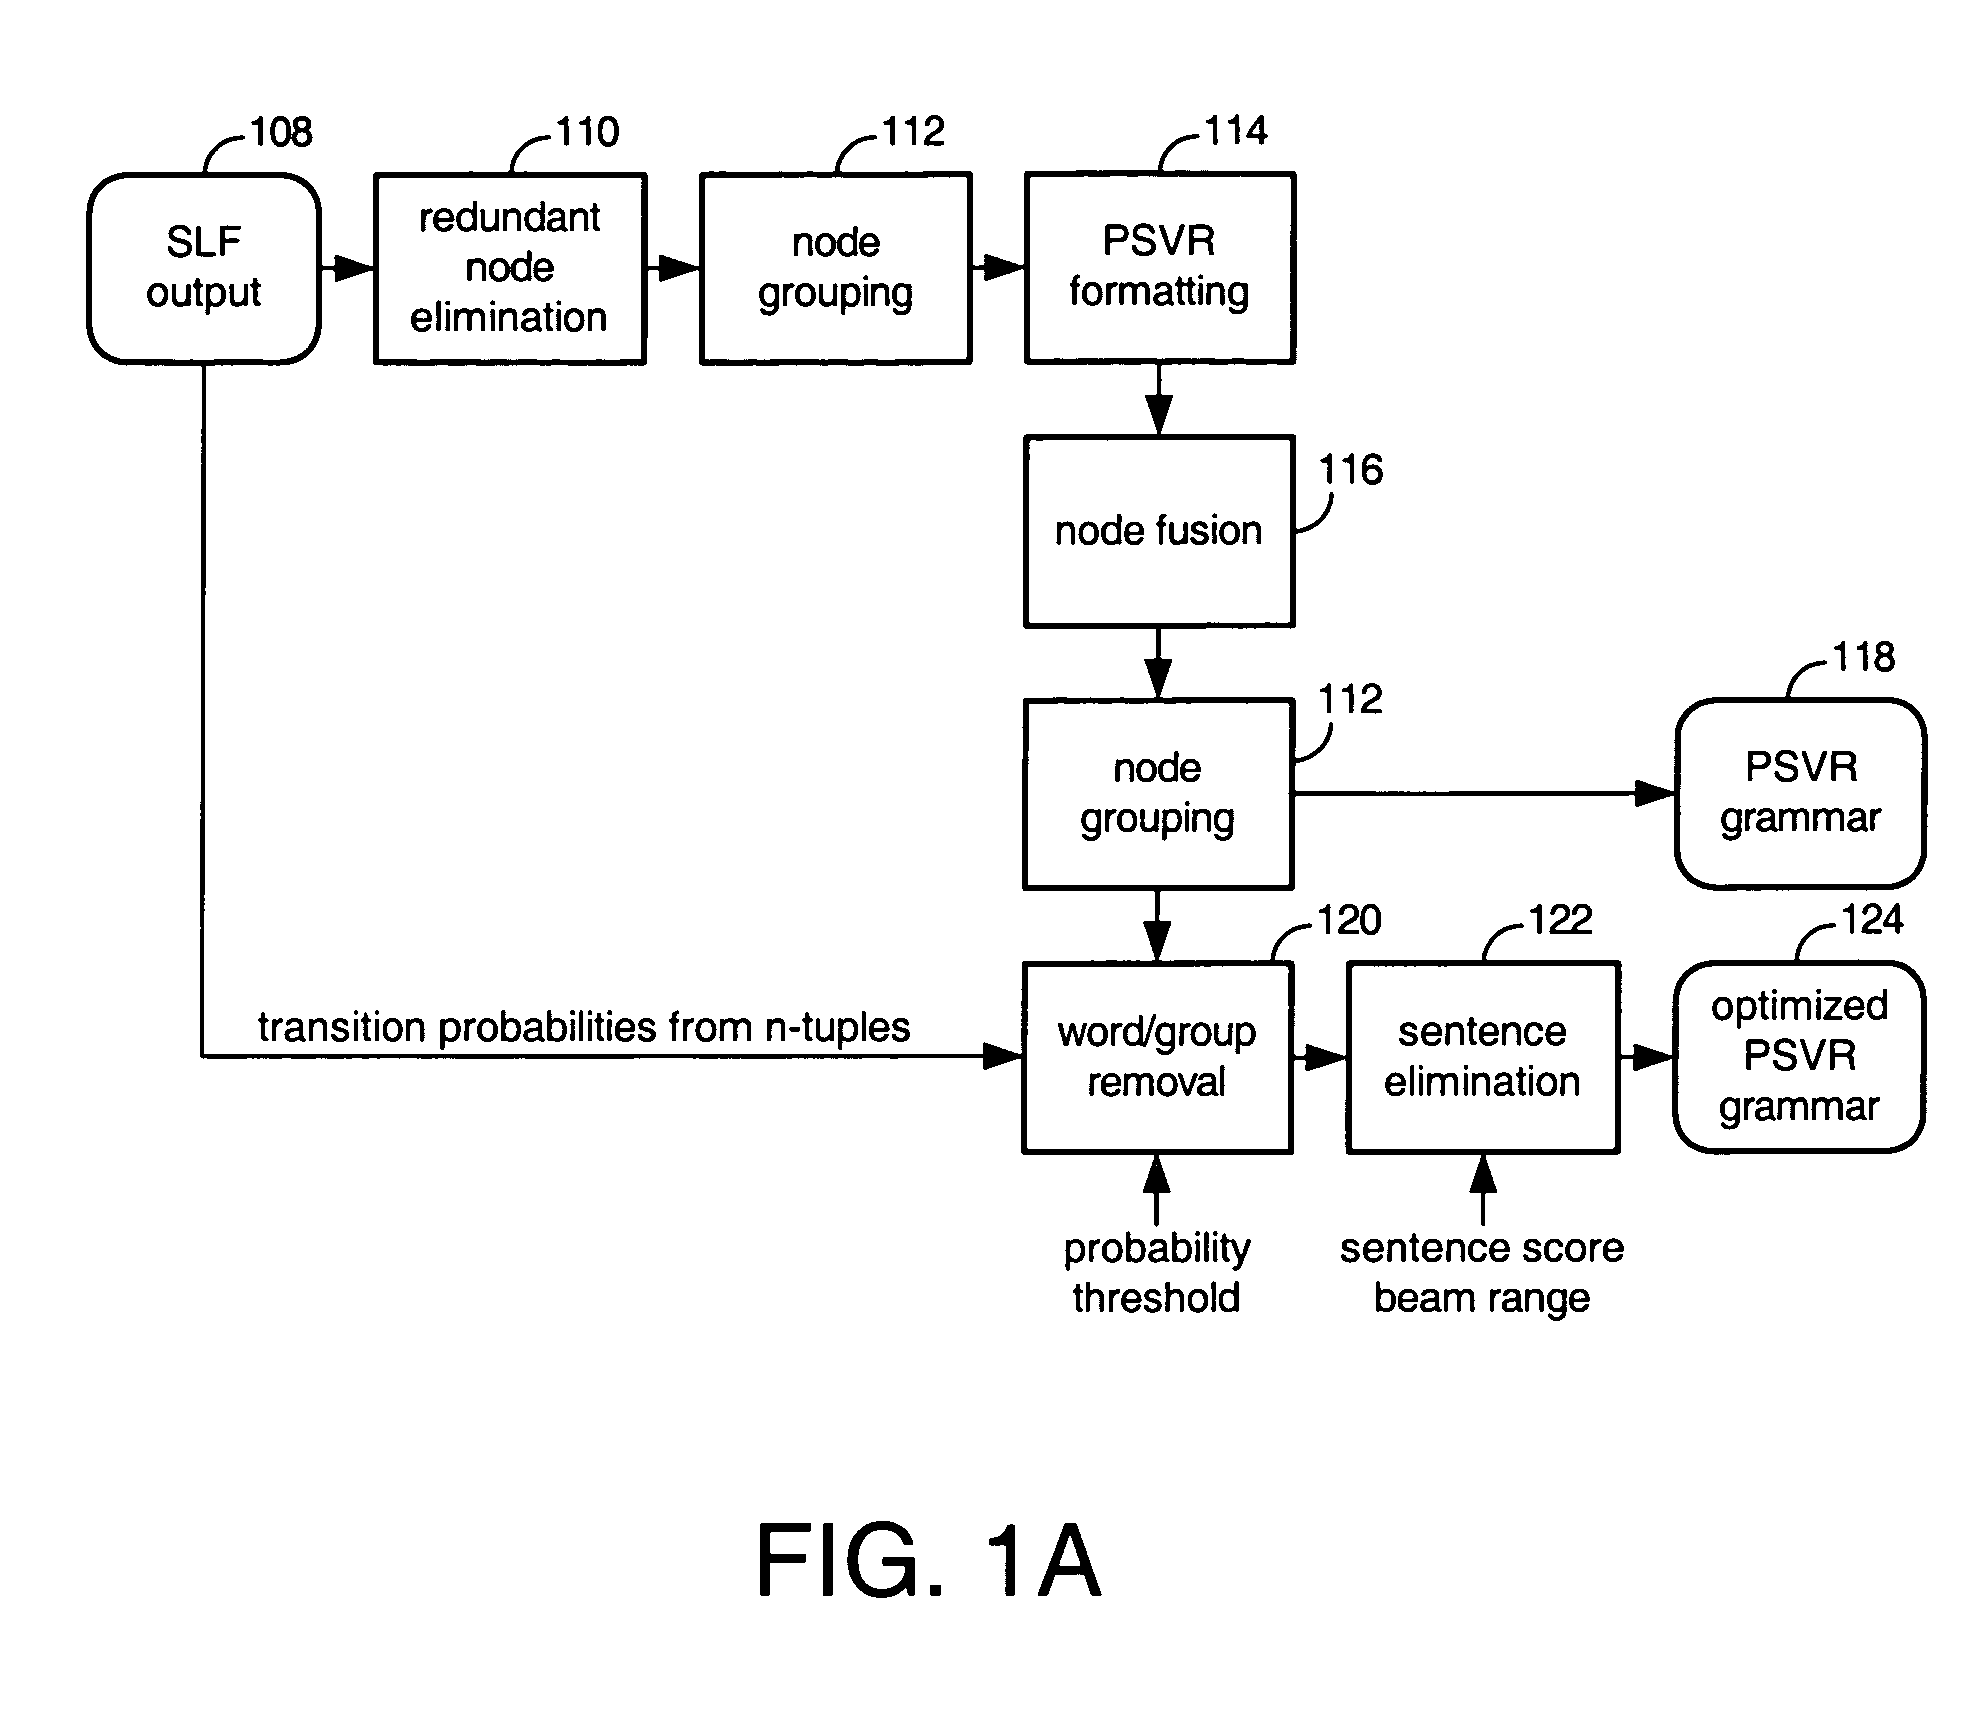 Structure for grammar and dictionary representation in voice recognition and method for simplifying link and node-generated grammars